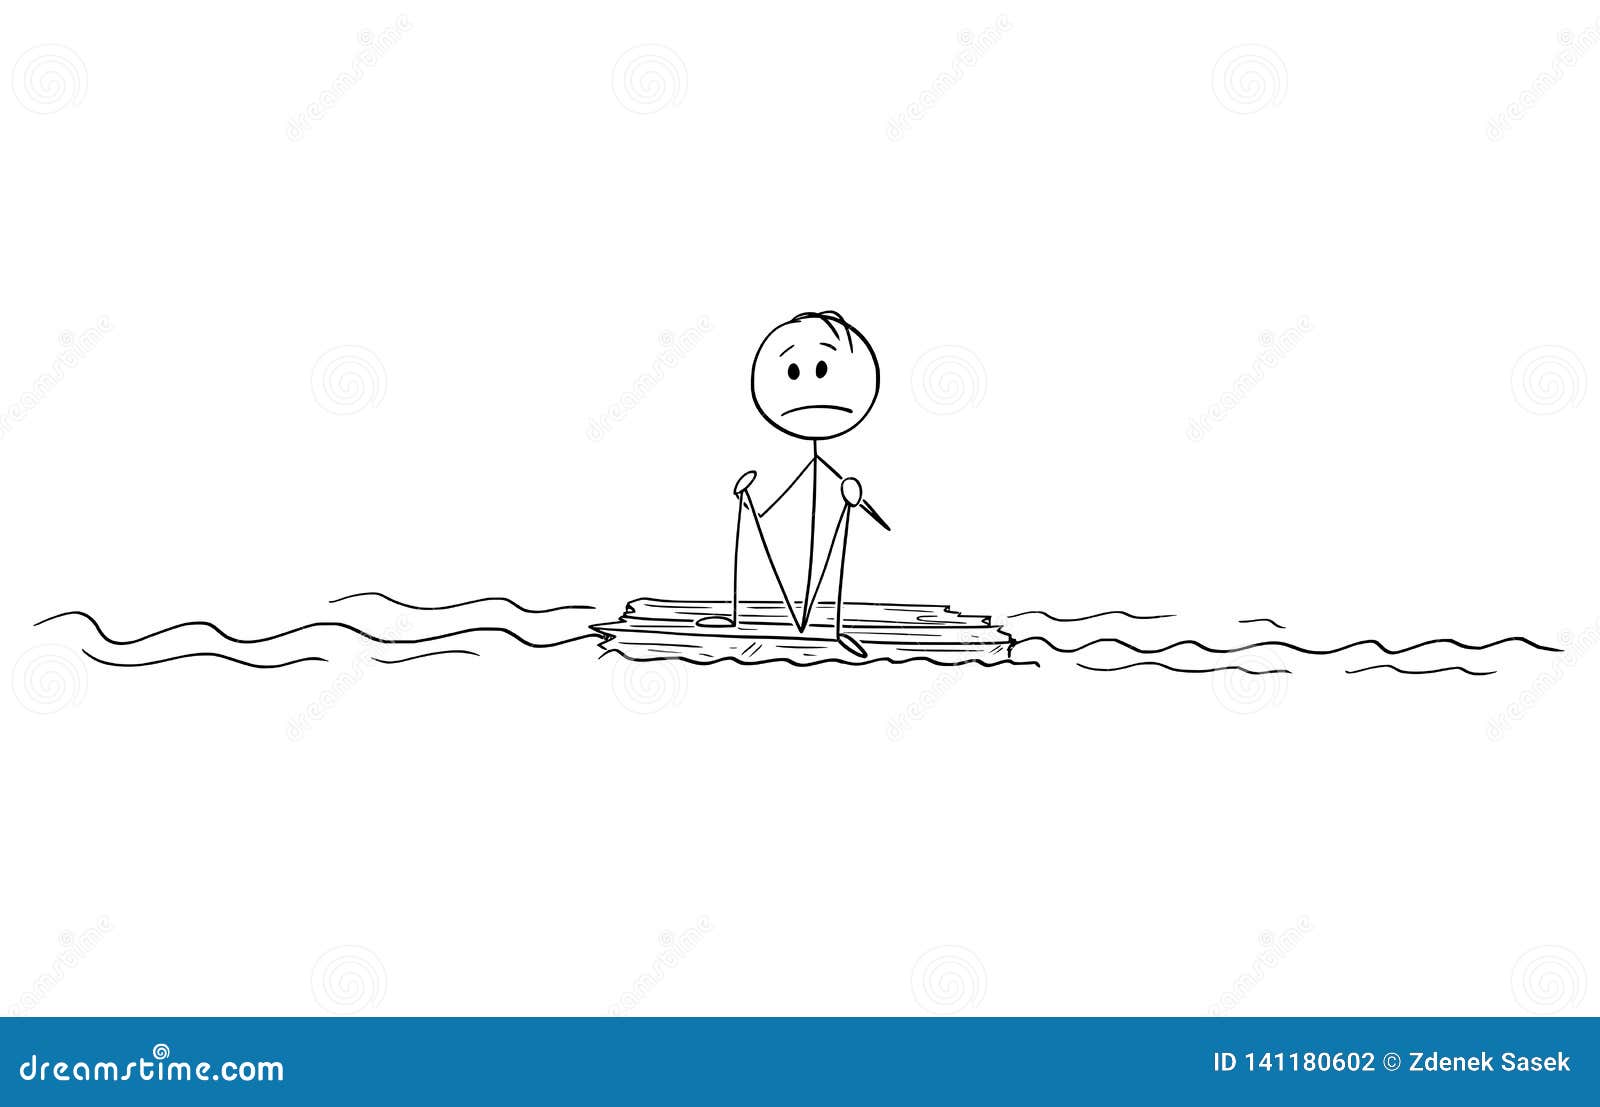 cartoon of man or castaway sitting alone on piece of wood in the middle of ocean